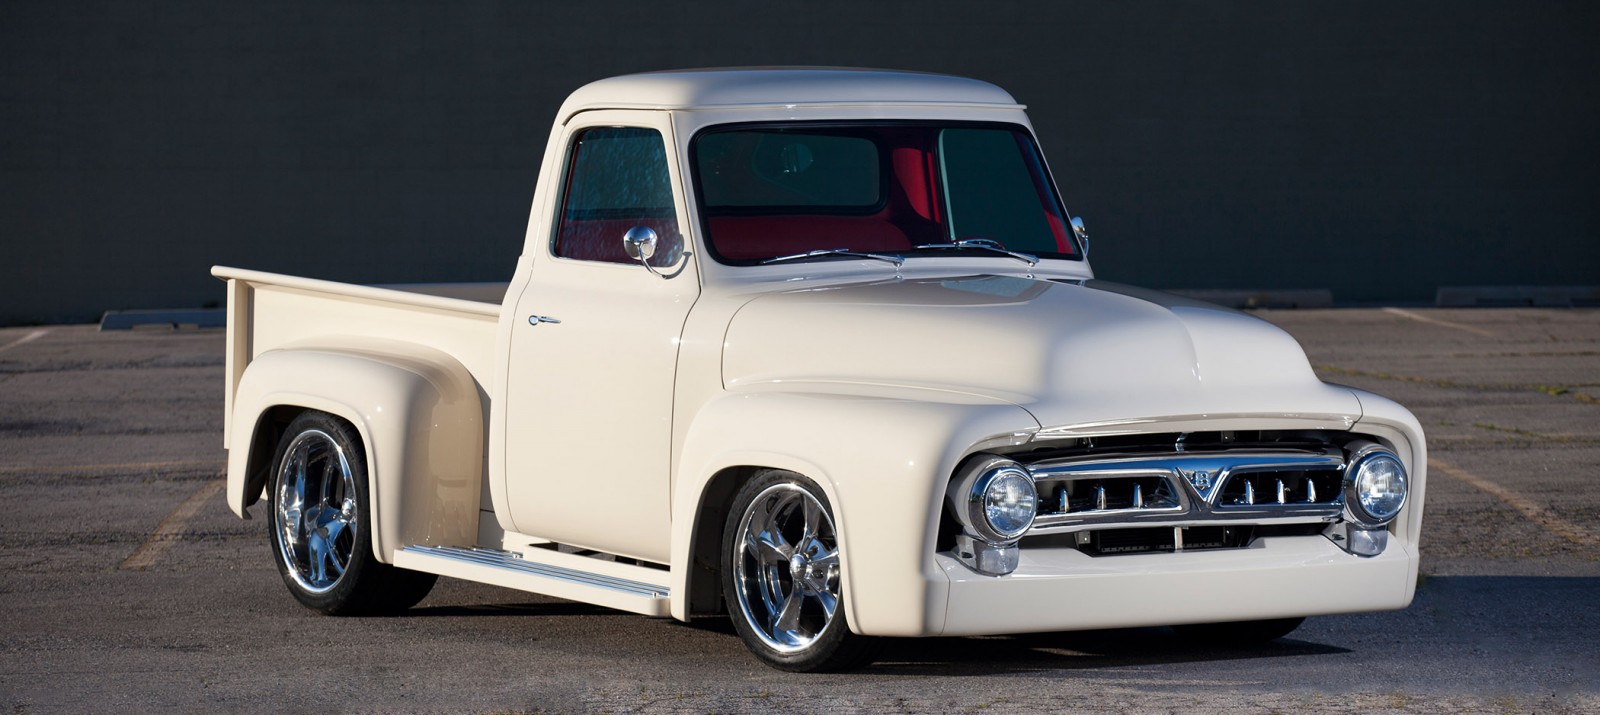 ’53 Ford Pickup